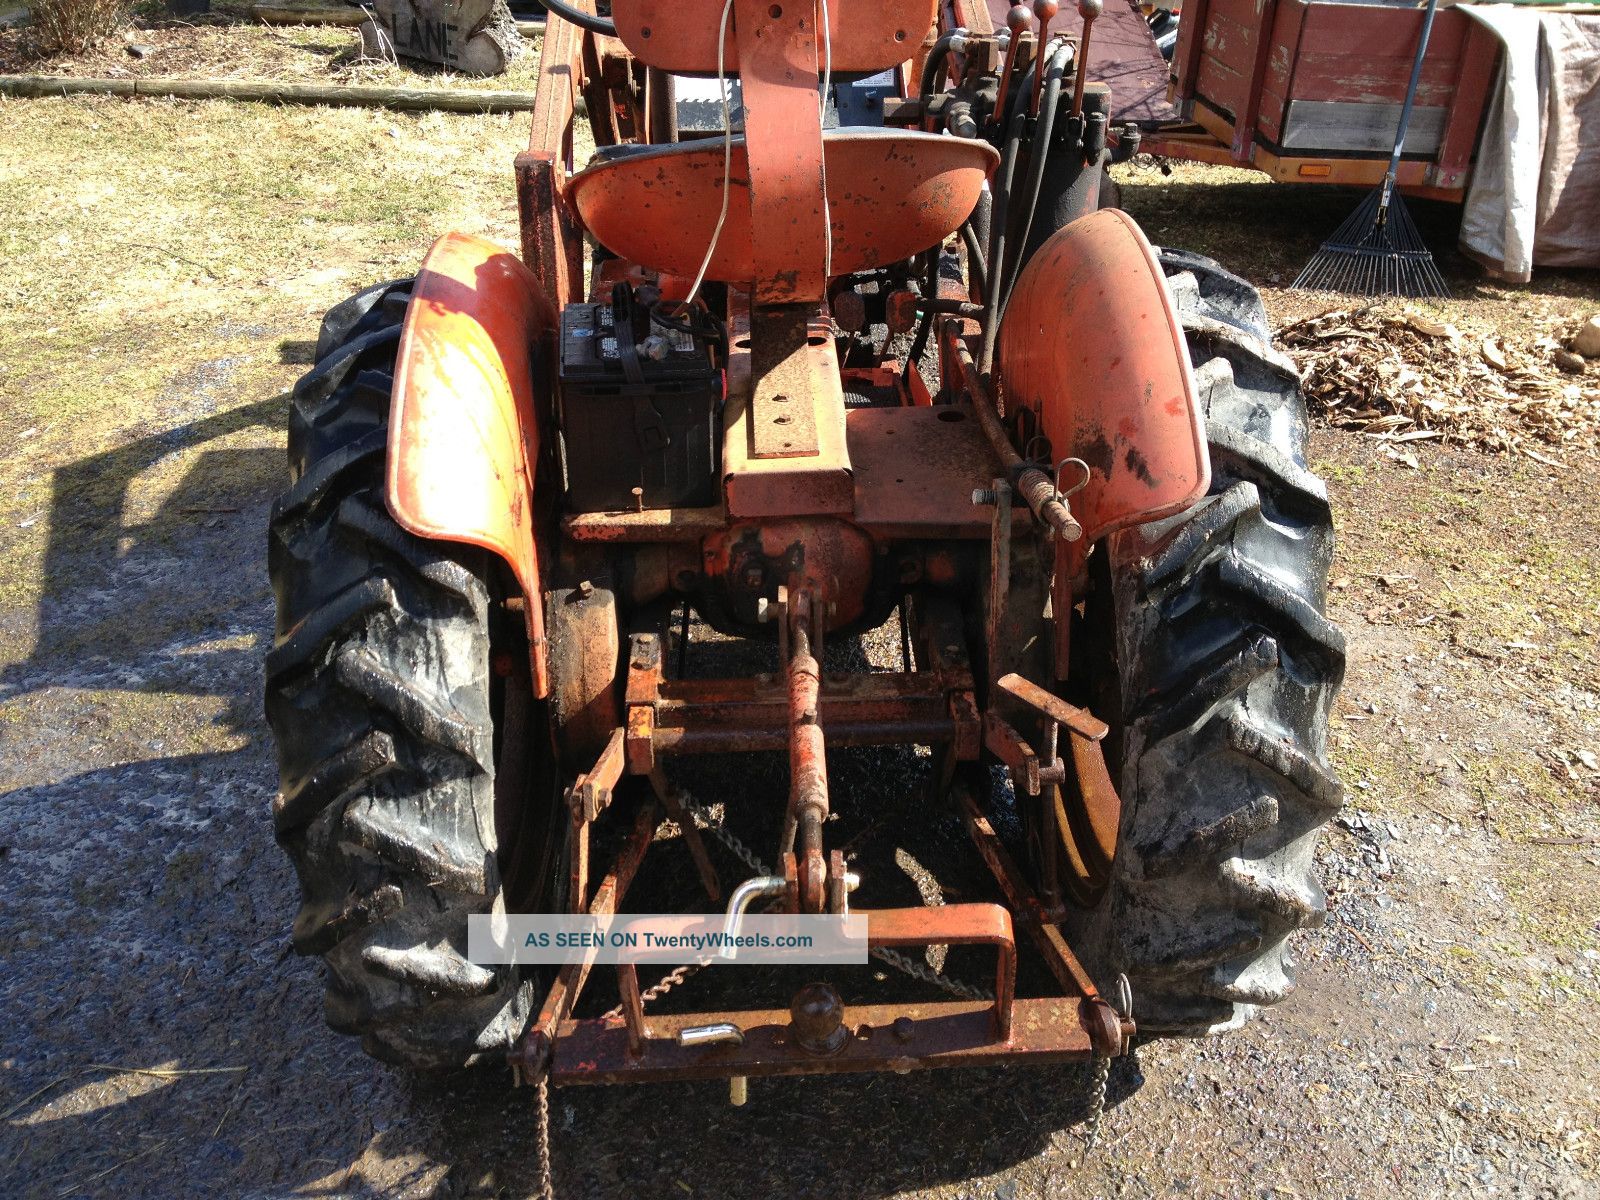 Economy Powerking Tractor With 5 Attachments And Front End Loader Fel